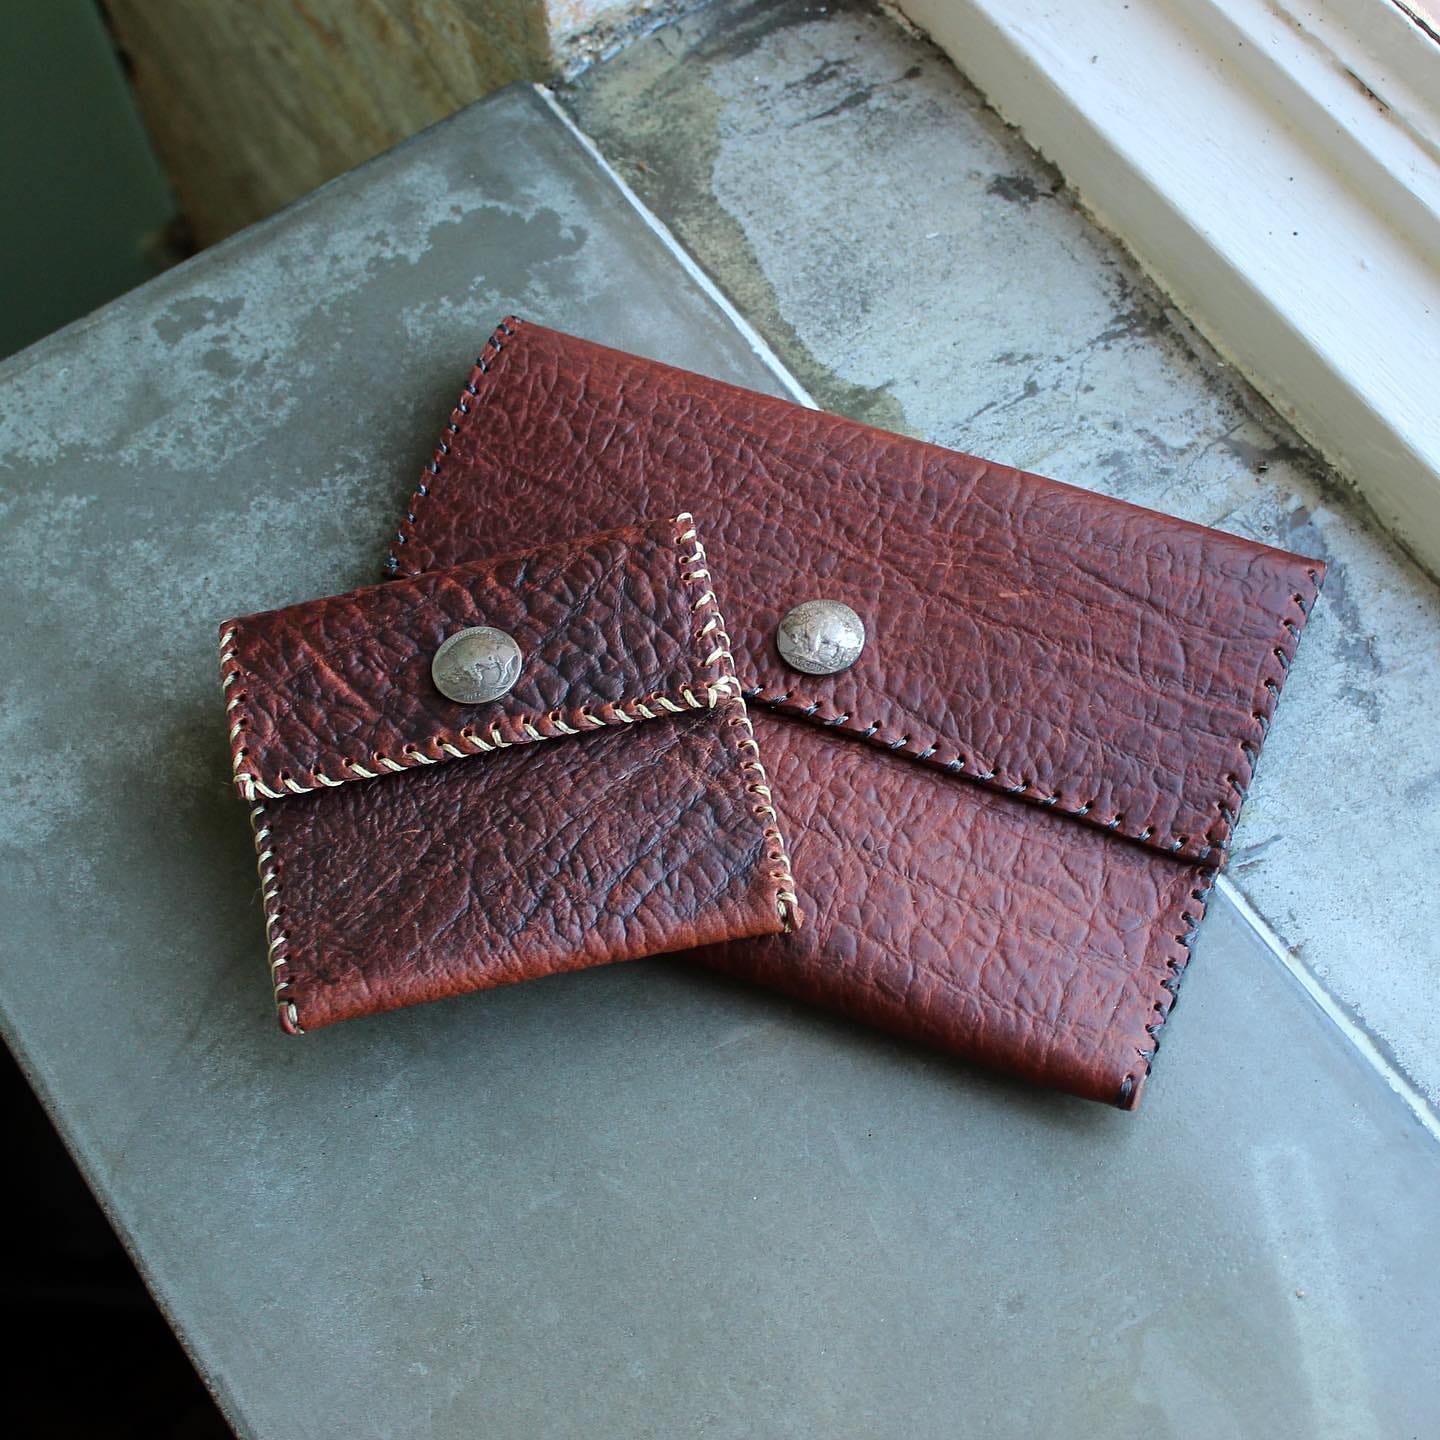 May be an image of saddle-stitched leather, leather and leather wallet